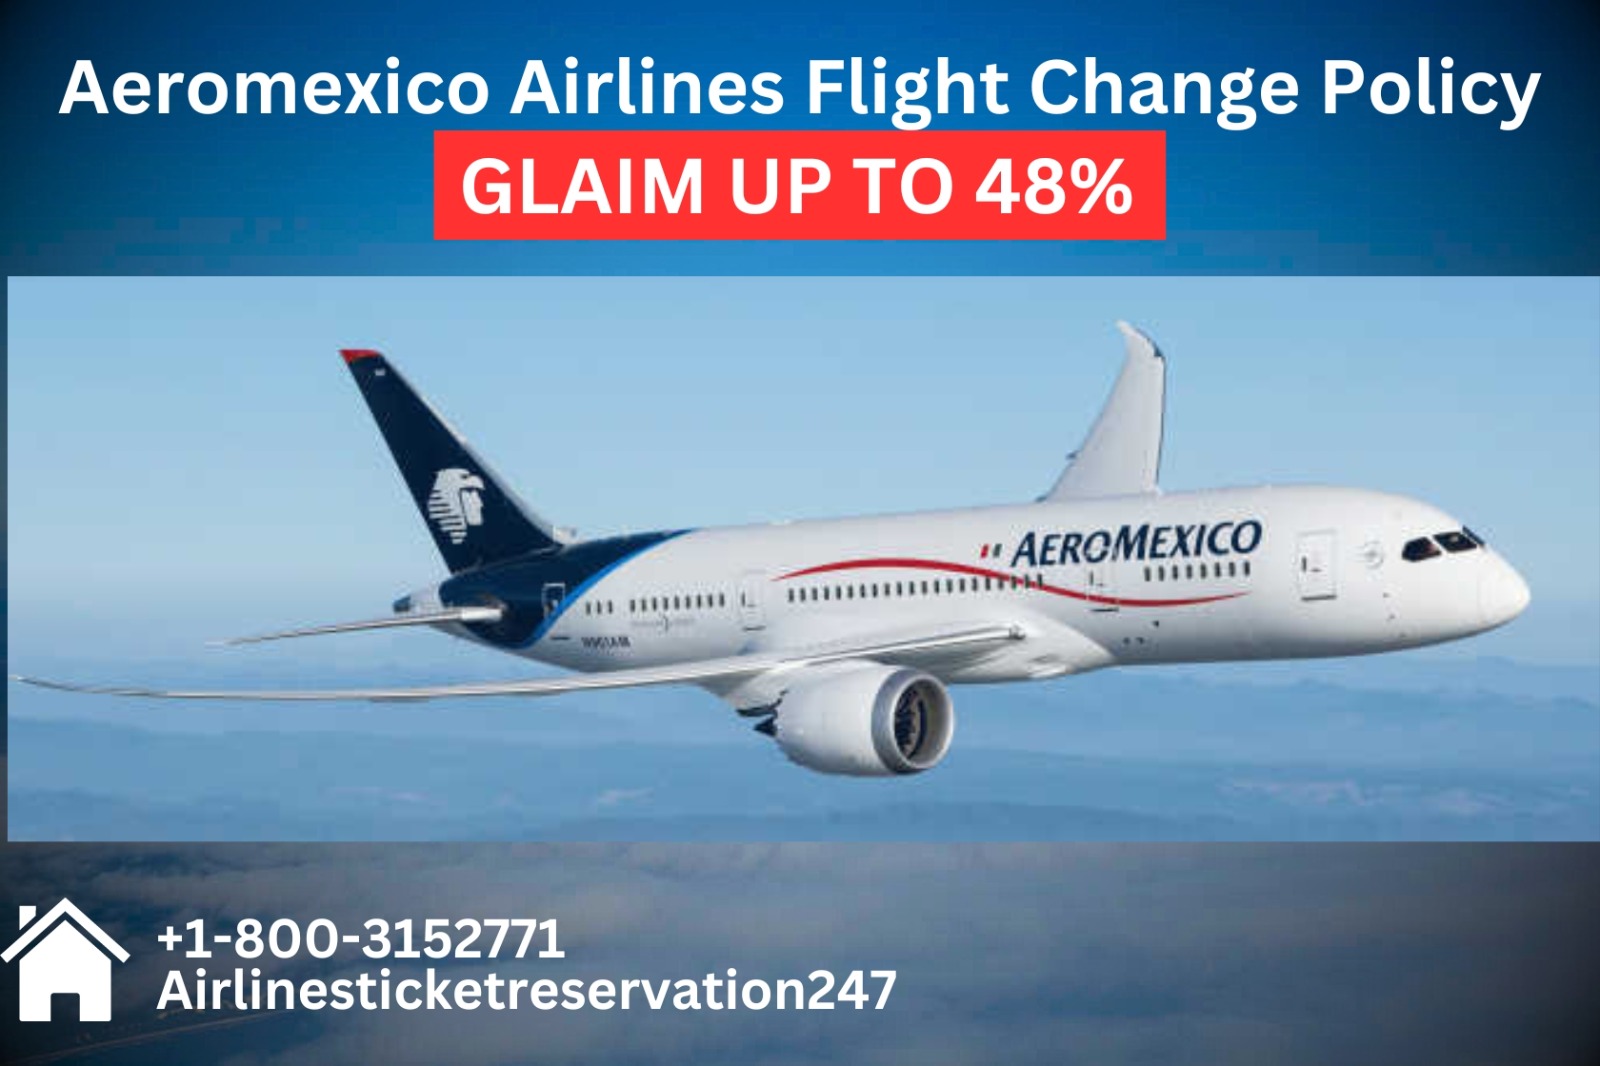 Aeromexico Airlines Flight Change Policy